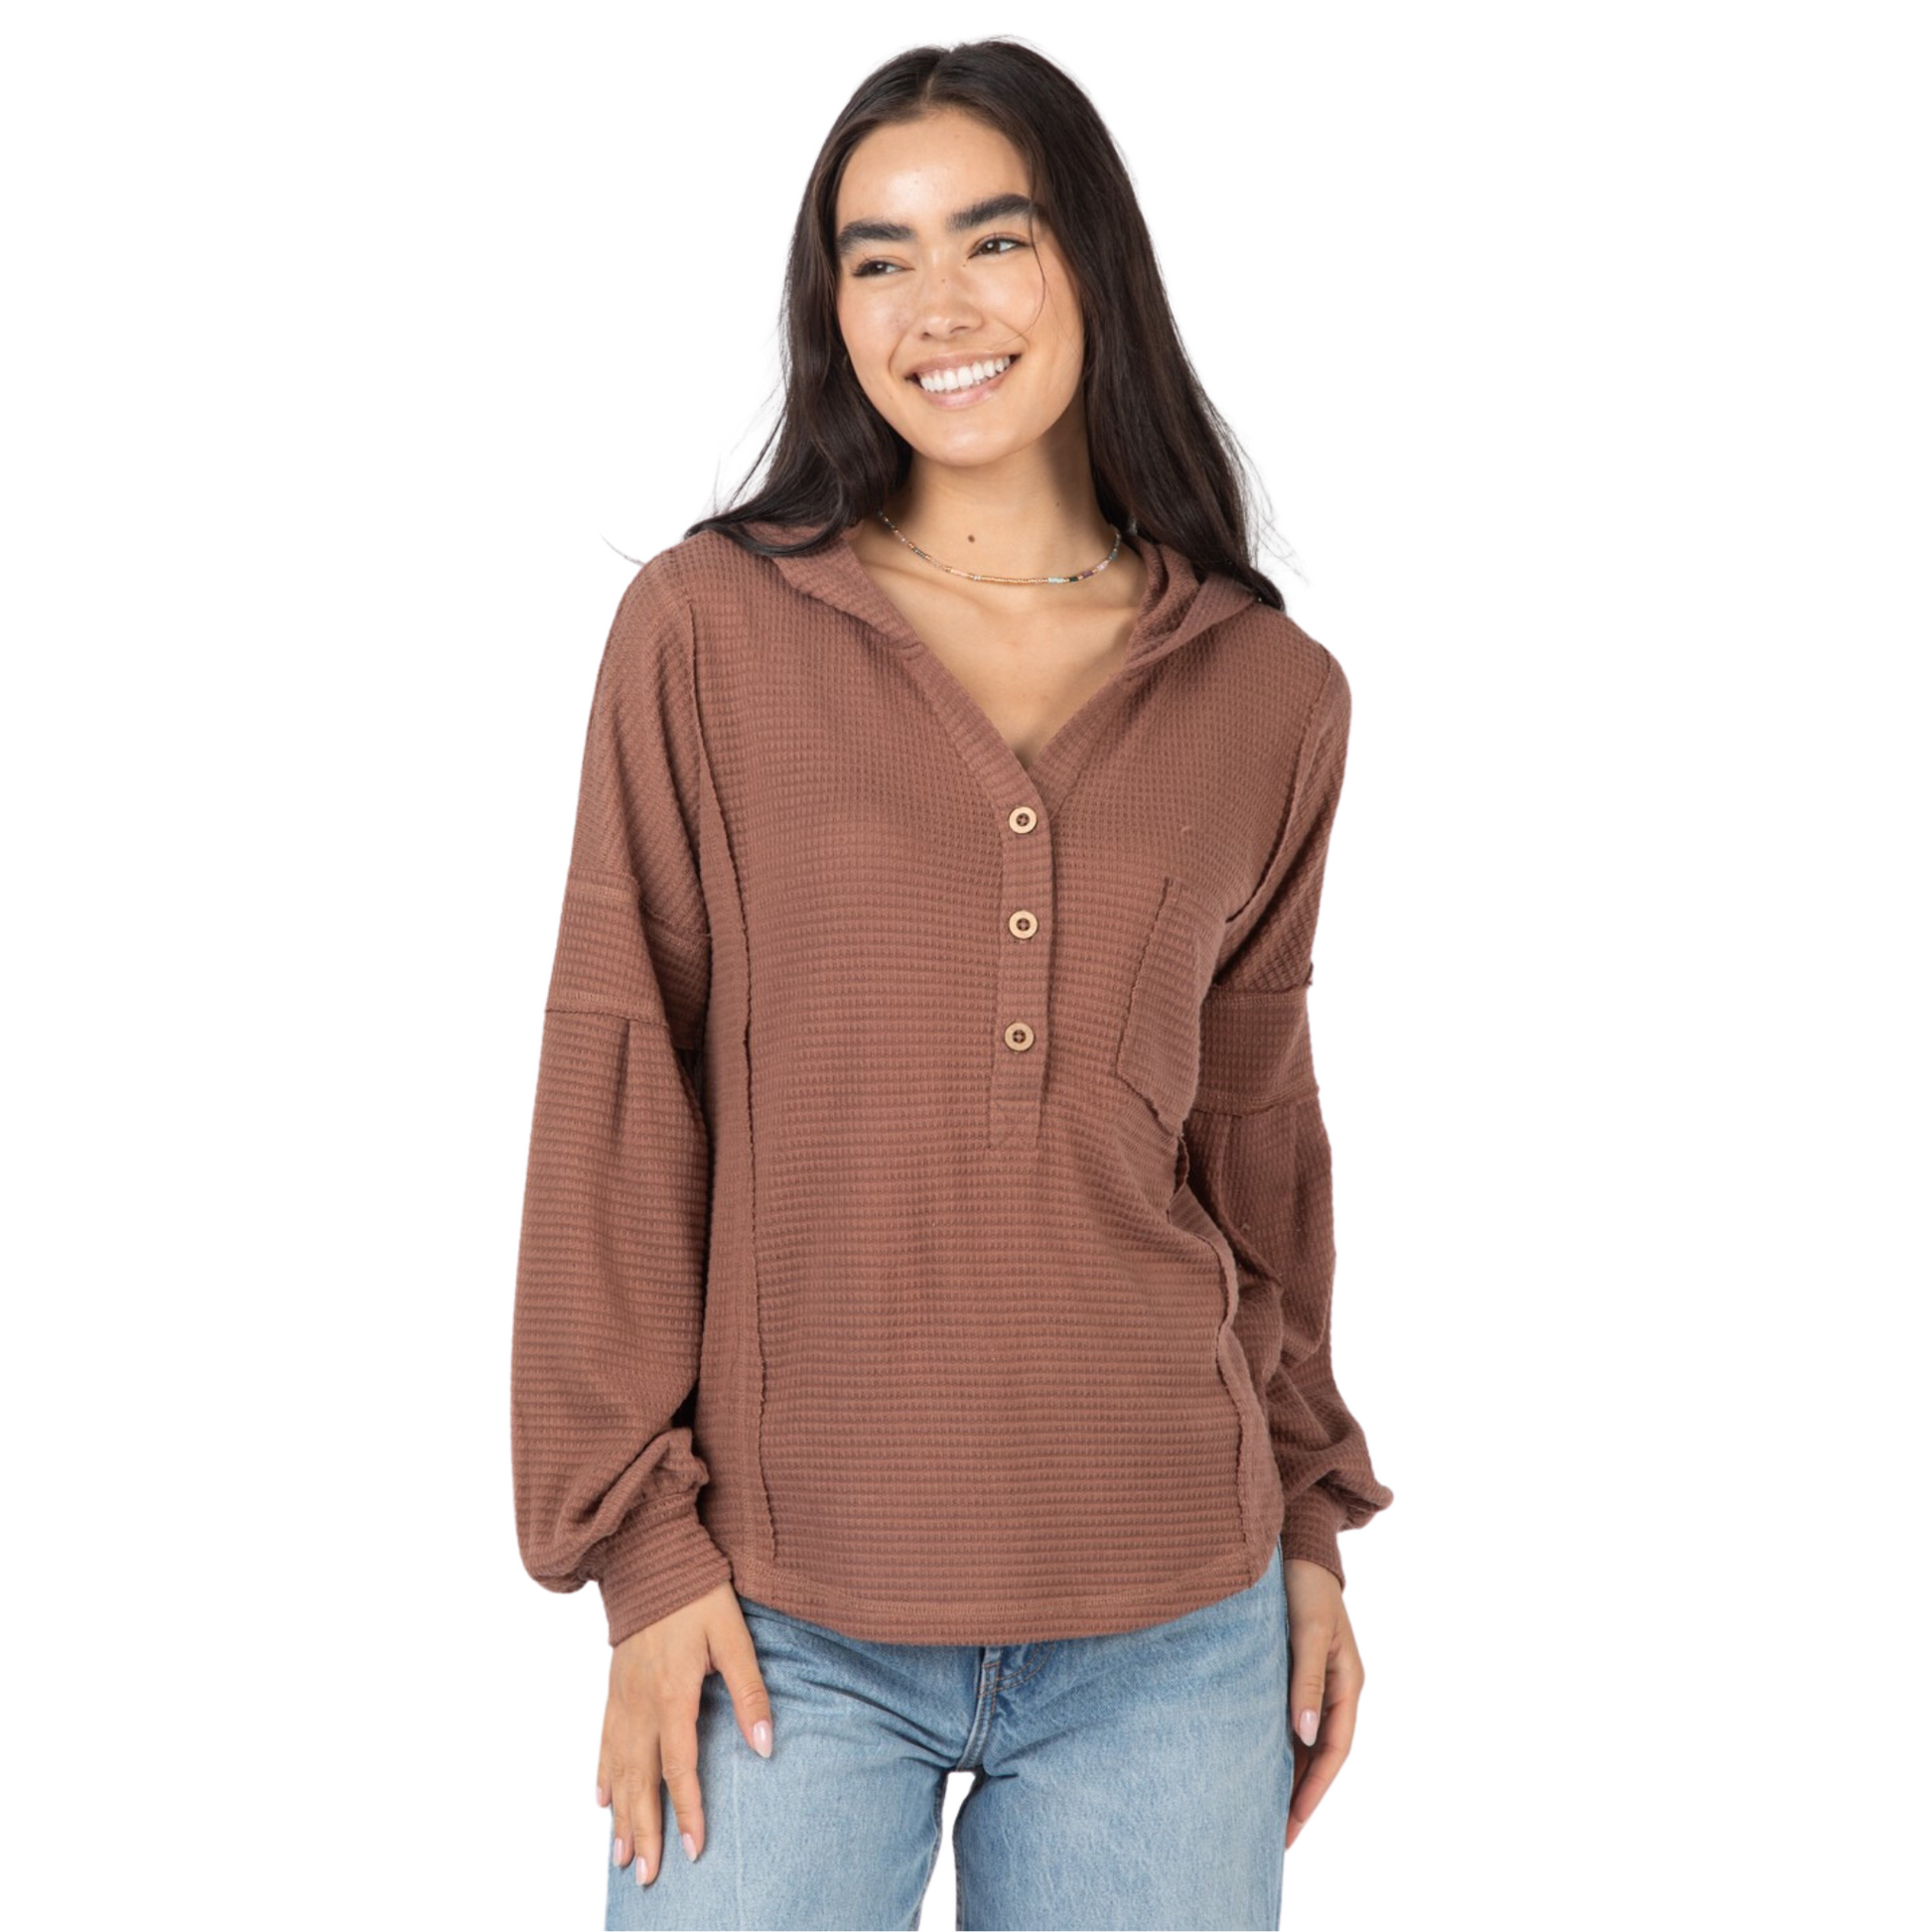 Knit henley top in cocoa